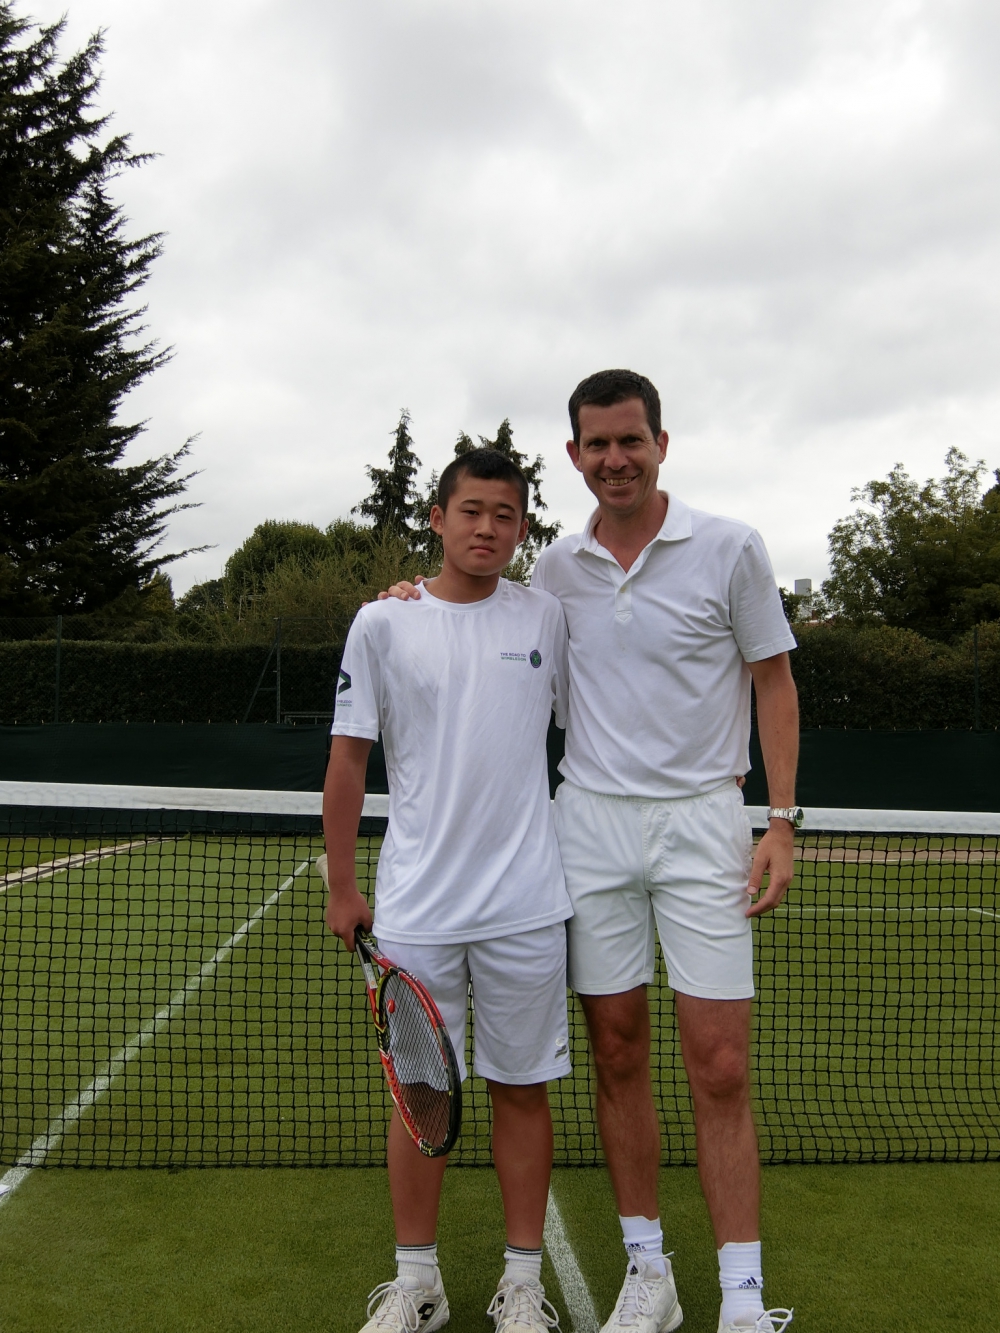 Wimbledon In Aeltc 本戦 The Road To Wimbledon グラスコート佐賀 テニスクラブ